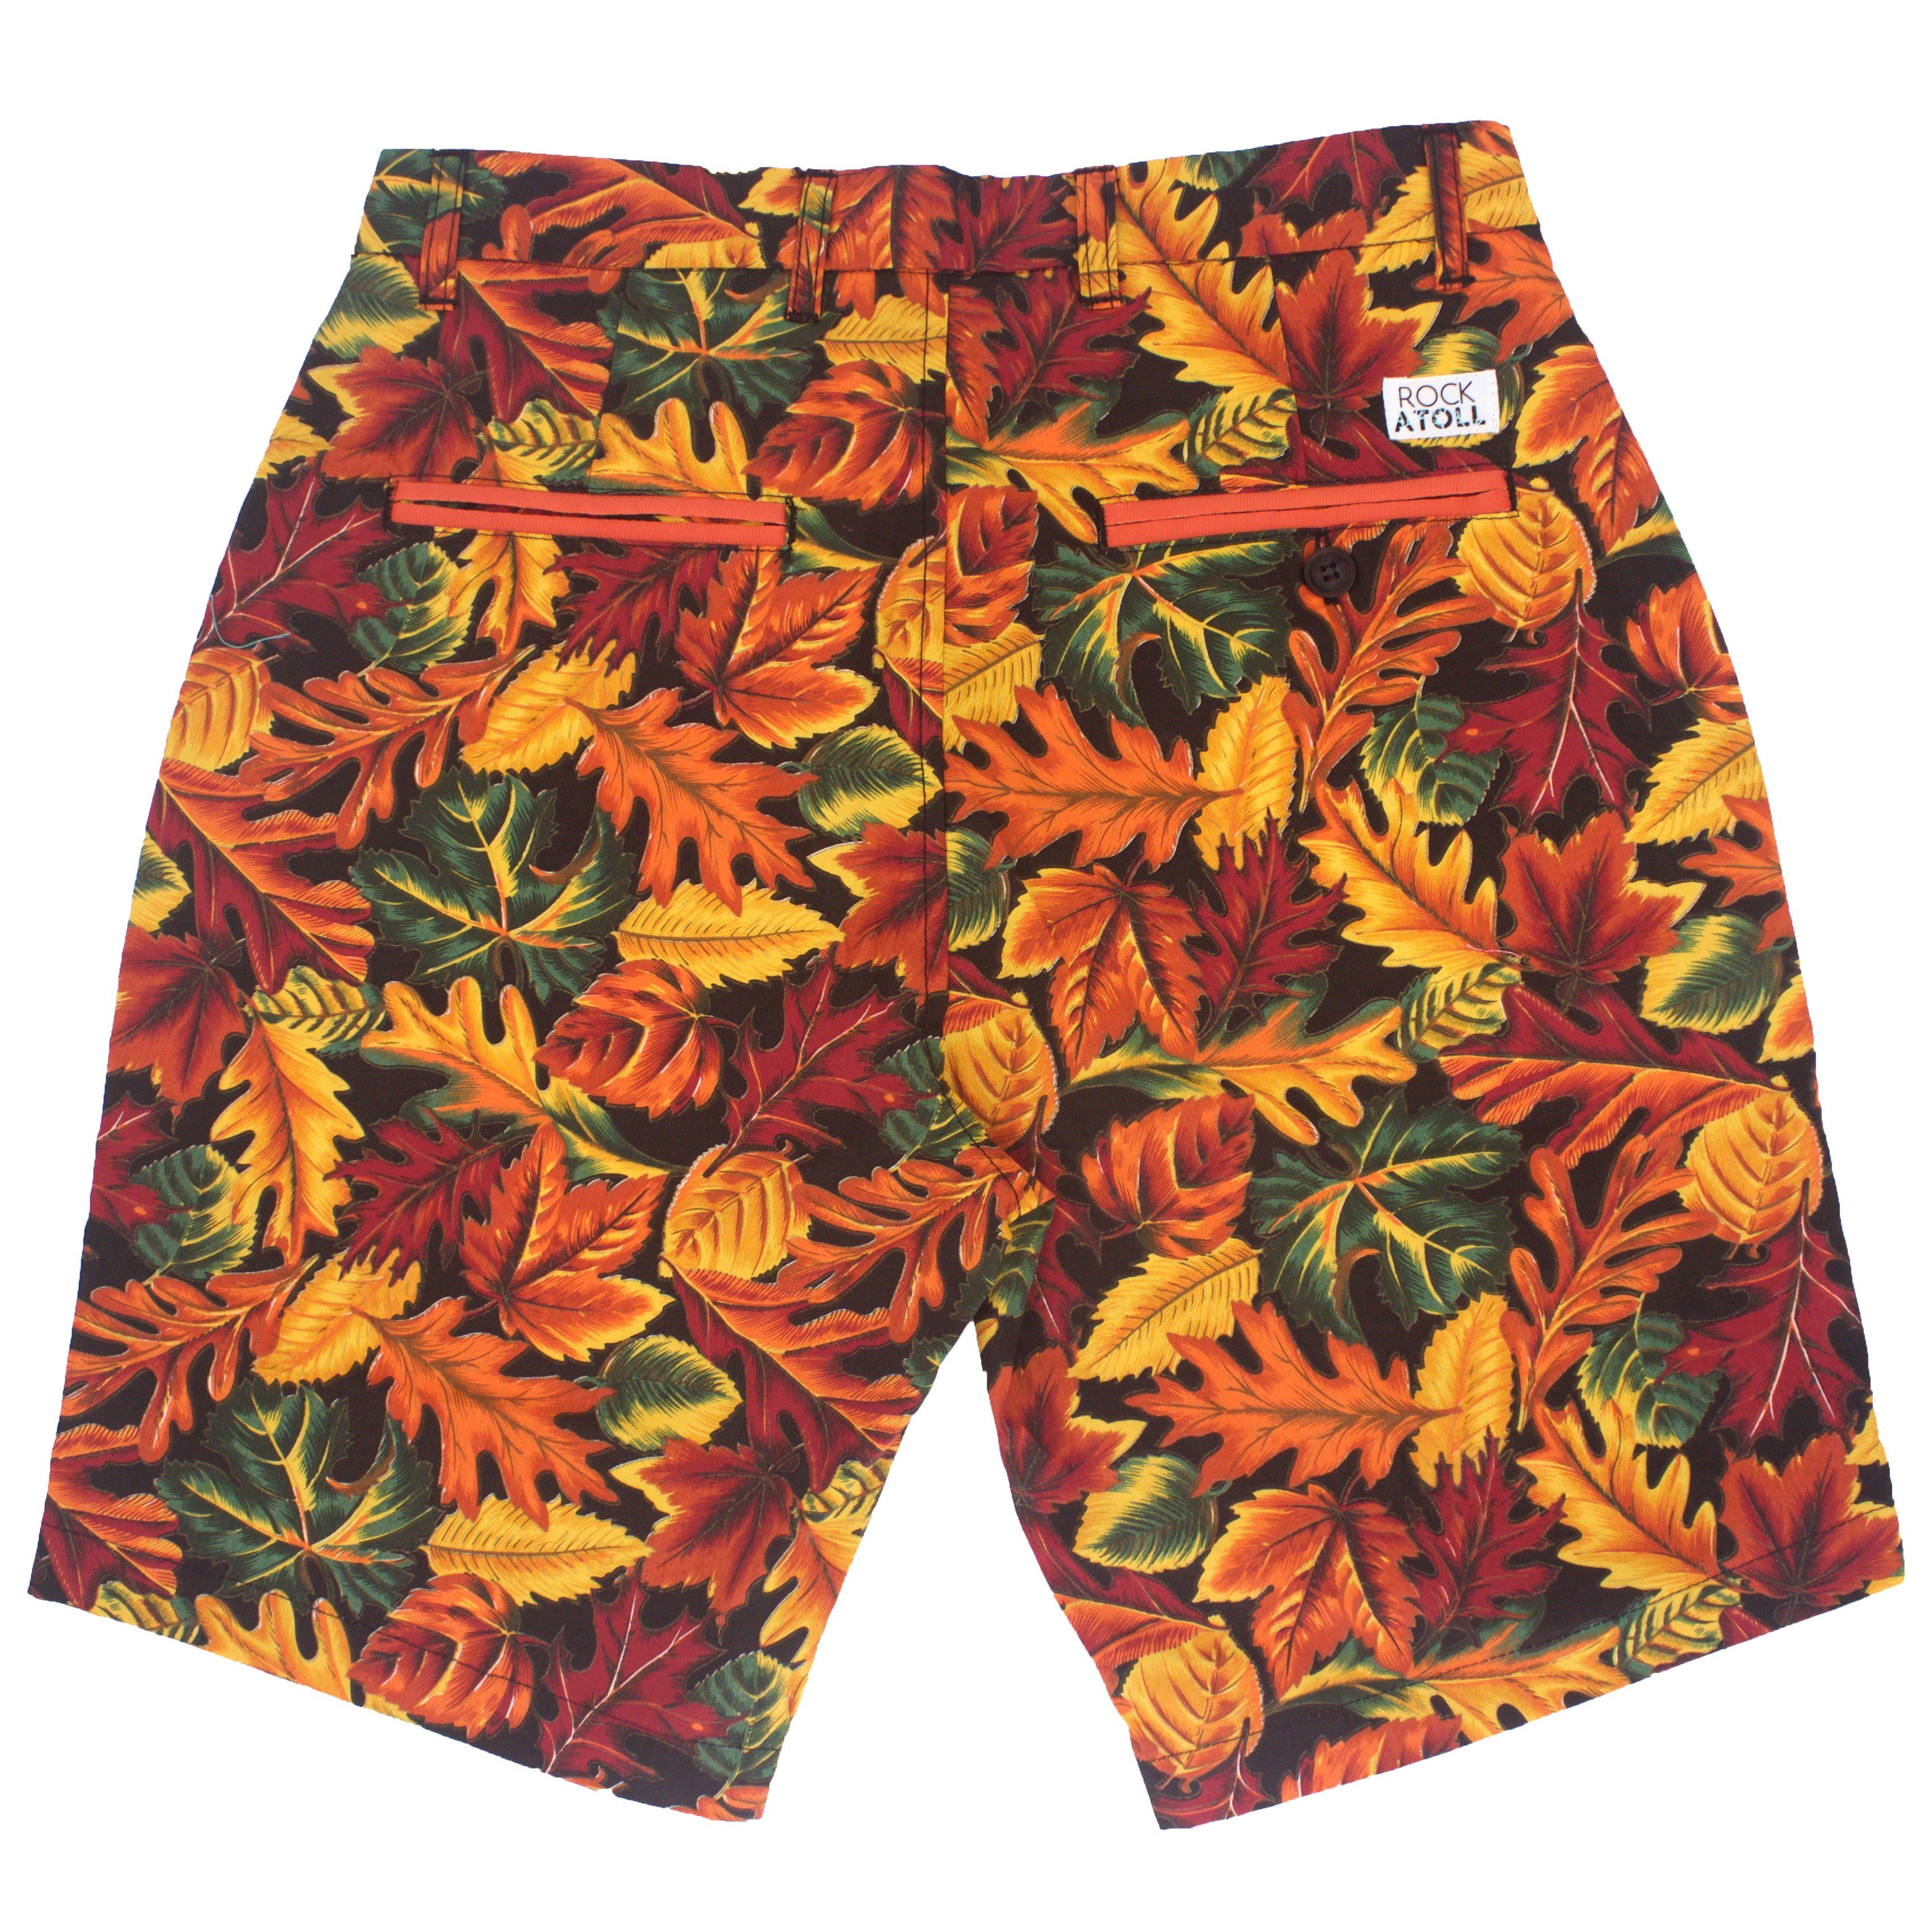 Autumn Colors Fall Leaves Outdoorsy Flat Front Print Shorts for Men